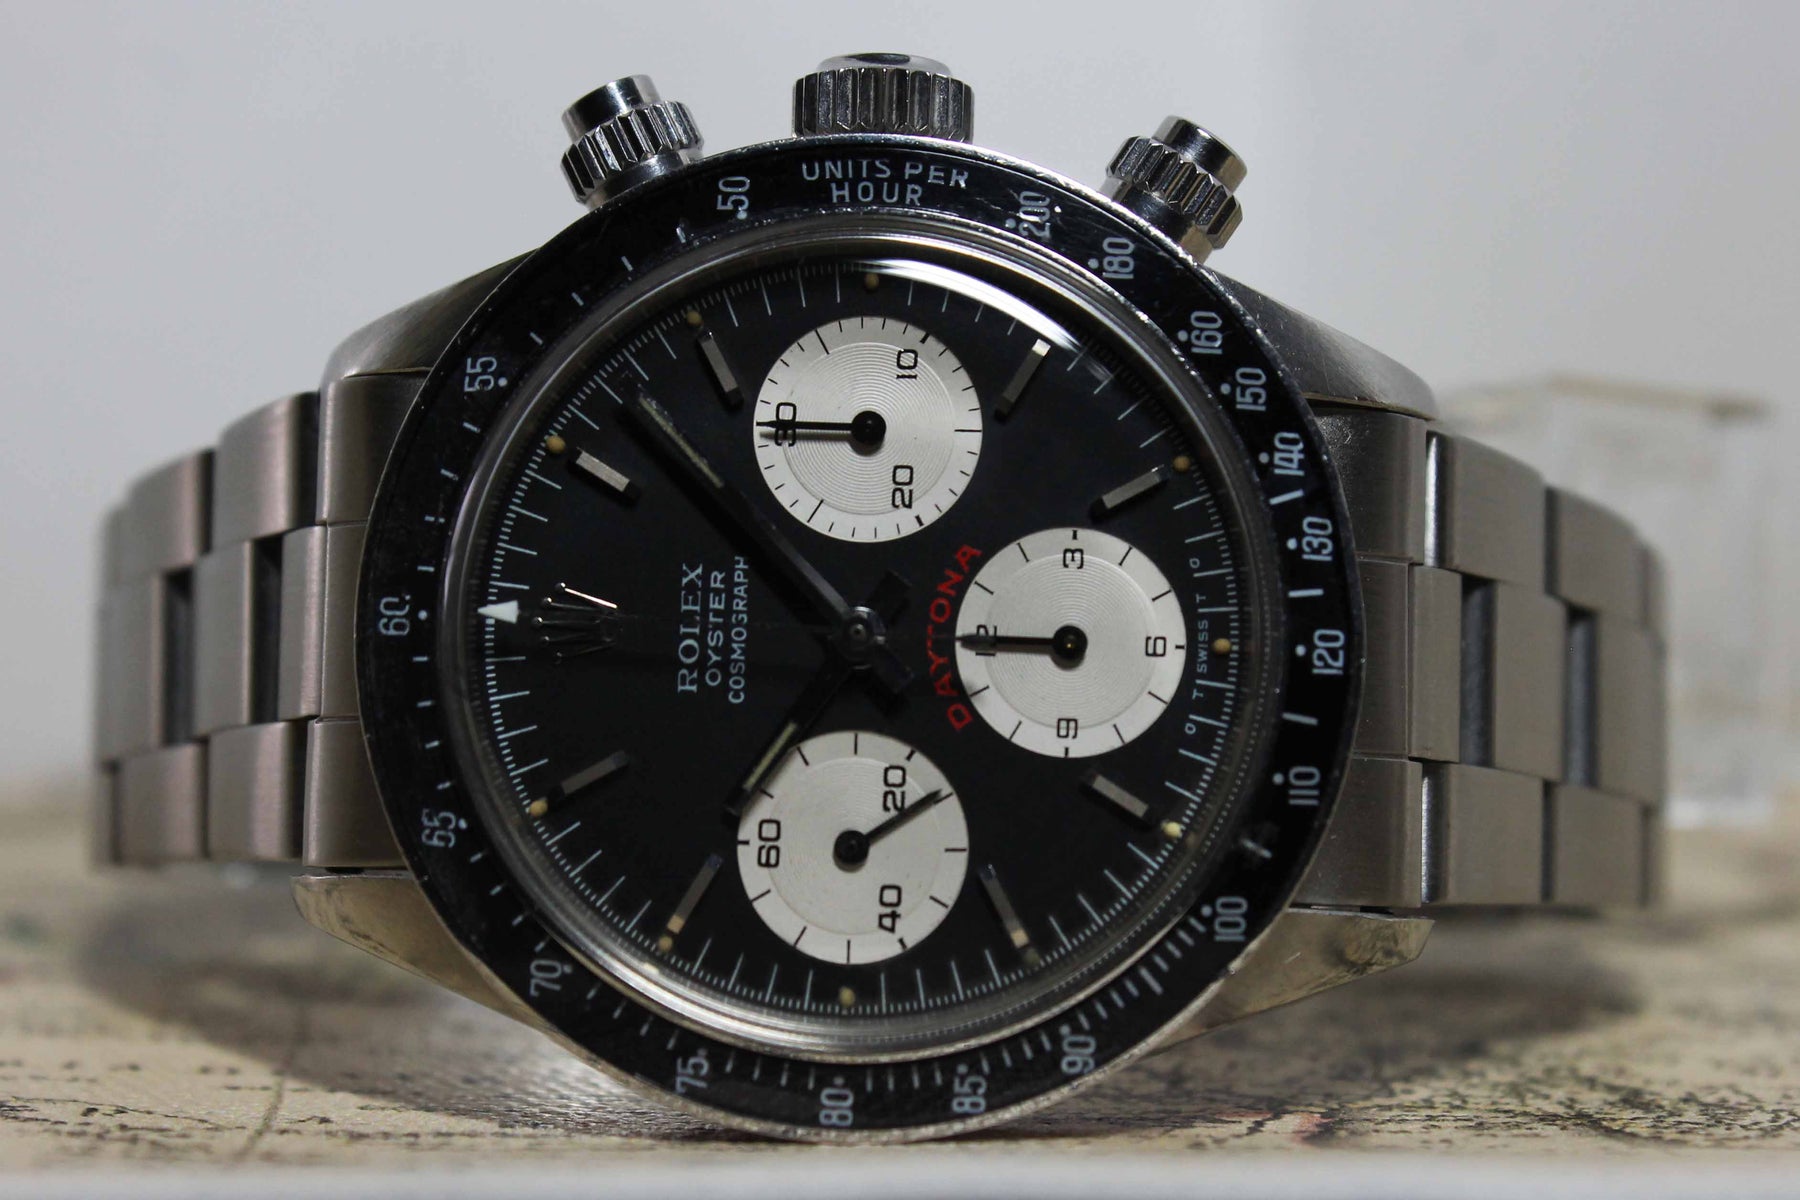 Rolex Daytona 'Big Red Sigma' Ref. 6263 Year 1973 (with Box & Papers)